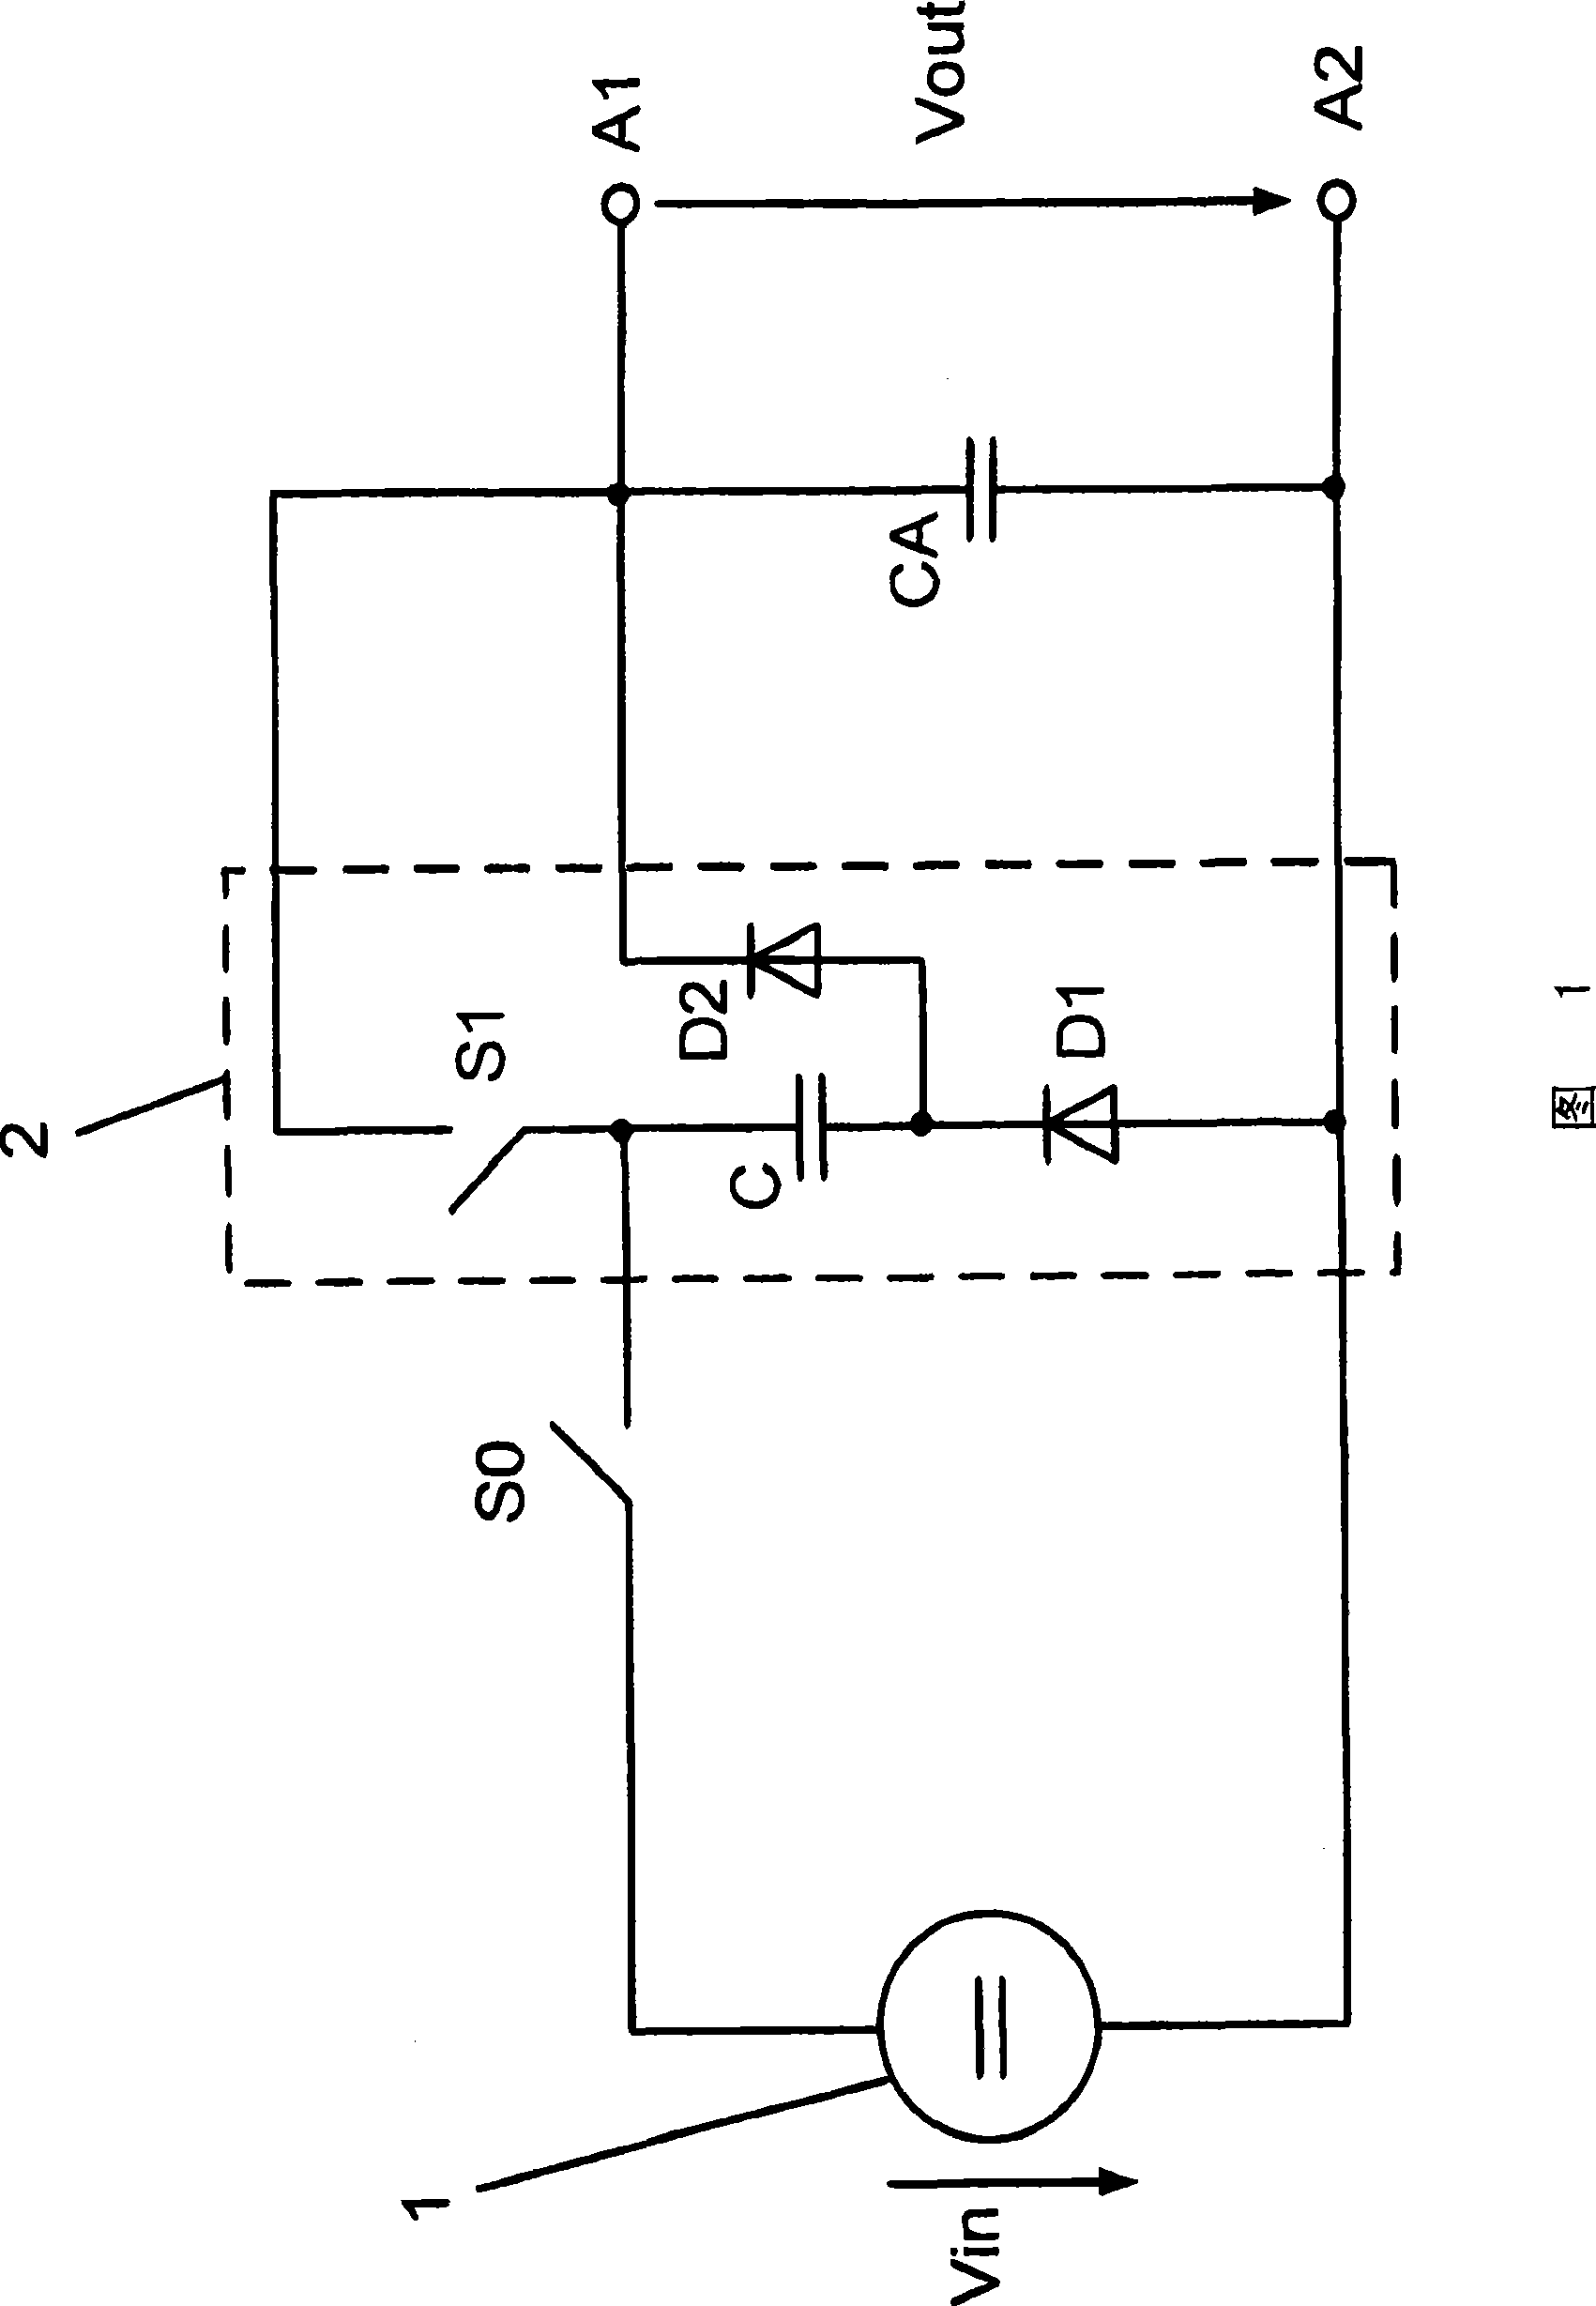 Converter circuit and method for operating such a converter circuit